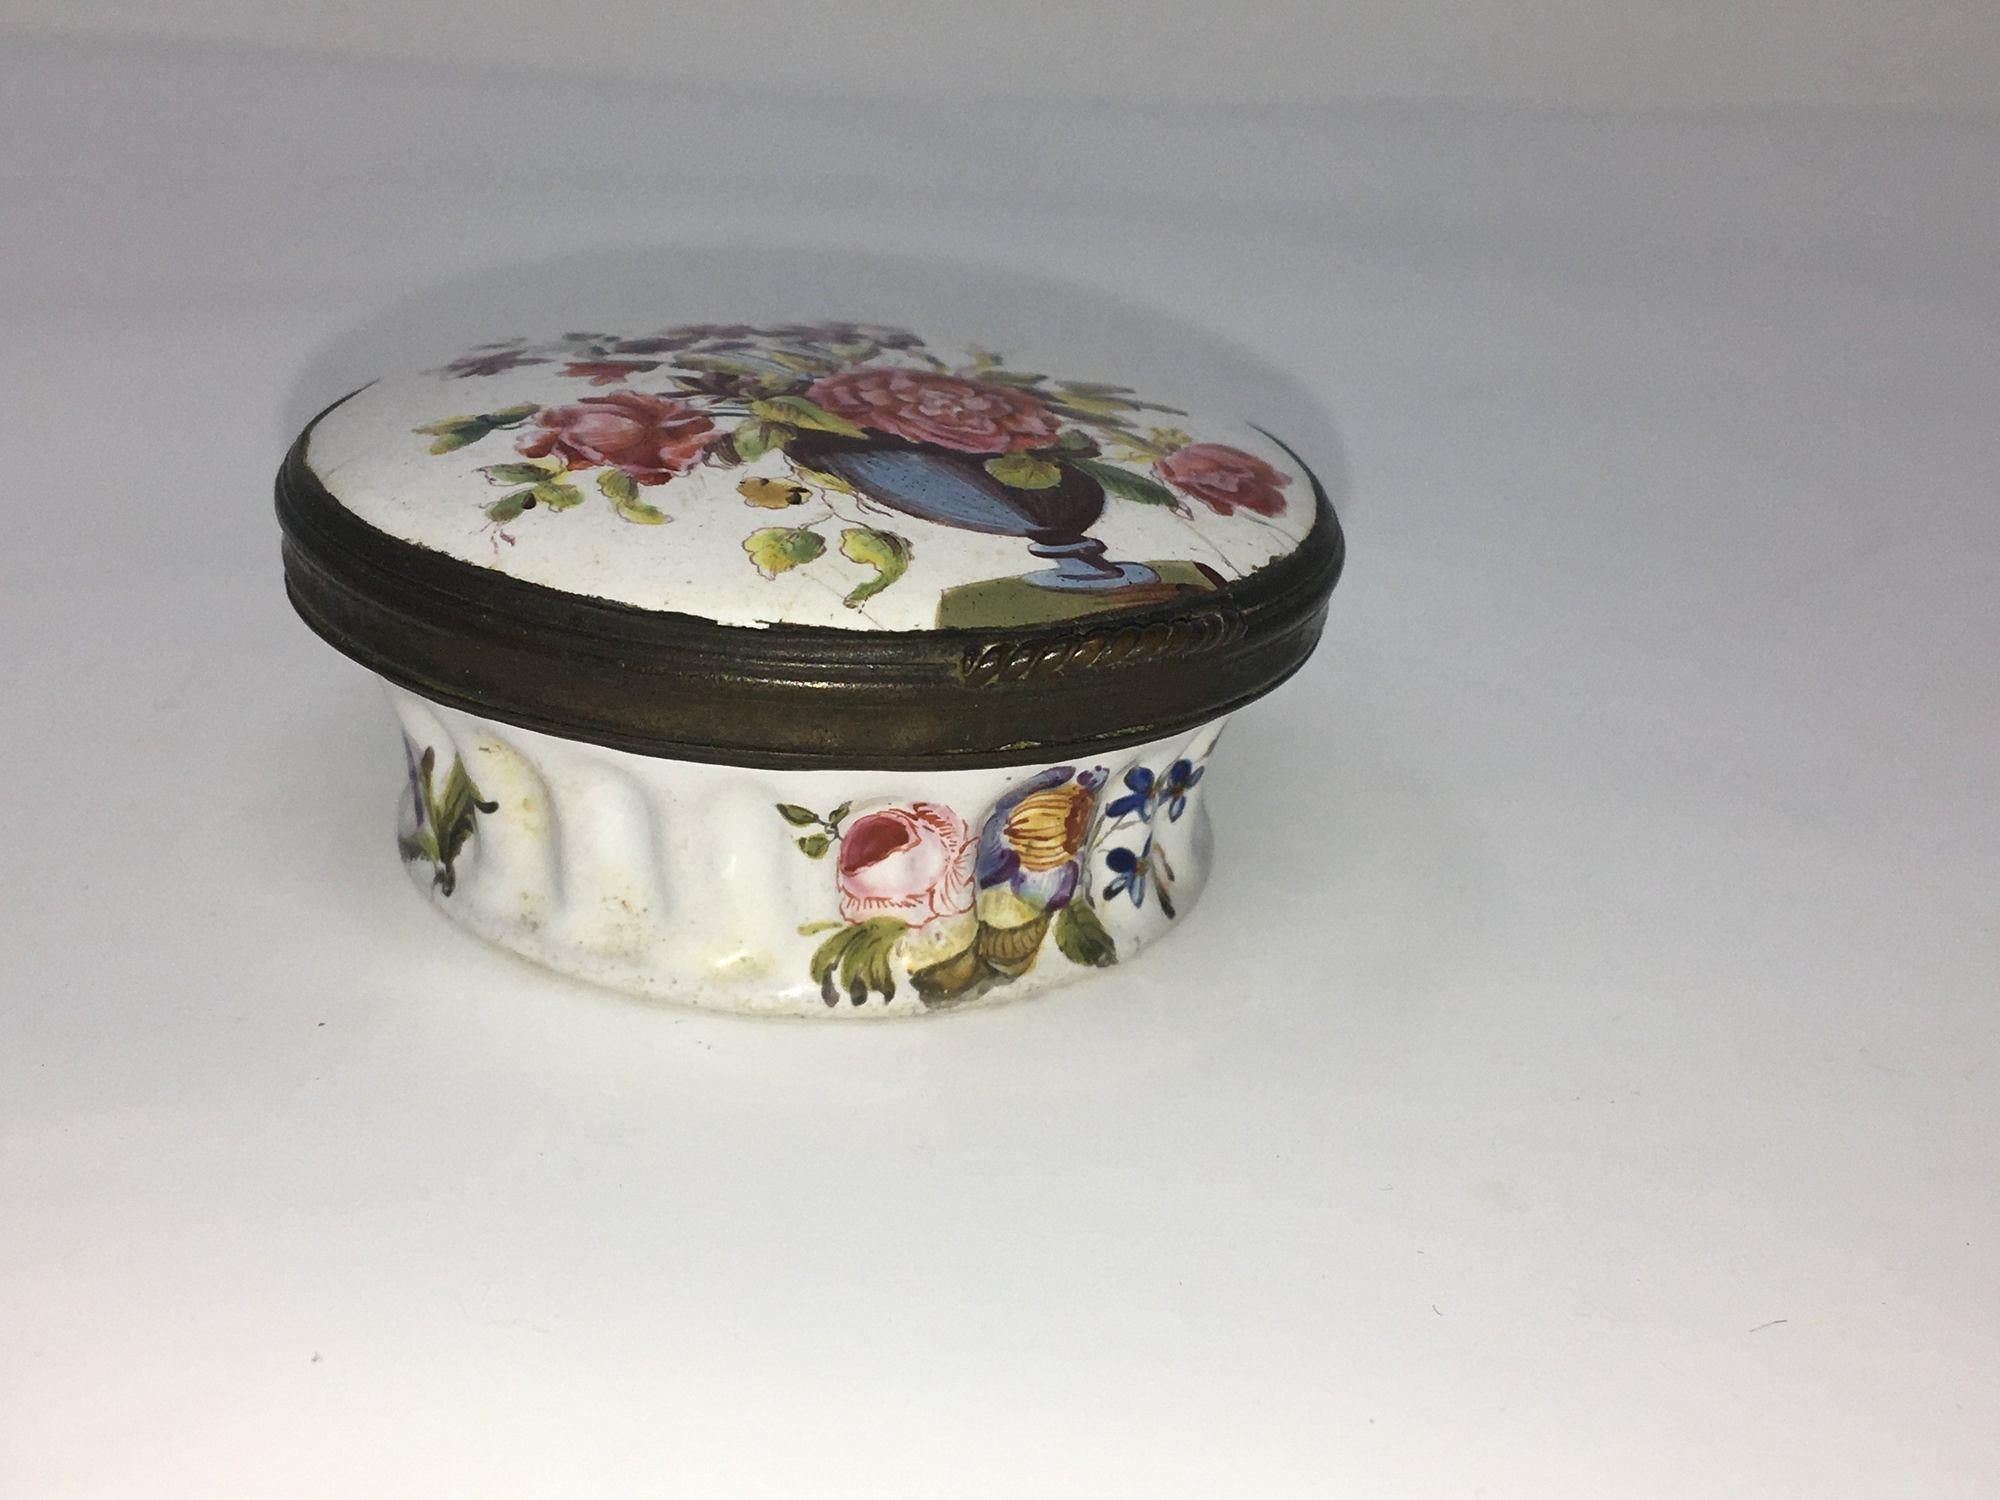 Stunning floral English Bilston or Battersea Enamel bonbonniere, enamel on copper, with unusual spider web design to underside, circa 1760. This could also be a patch box, but is larger in size than these generally are. Painting is of especially